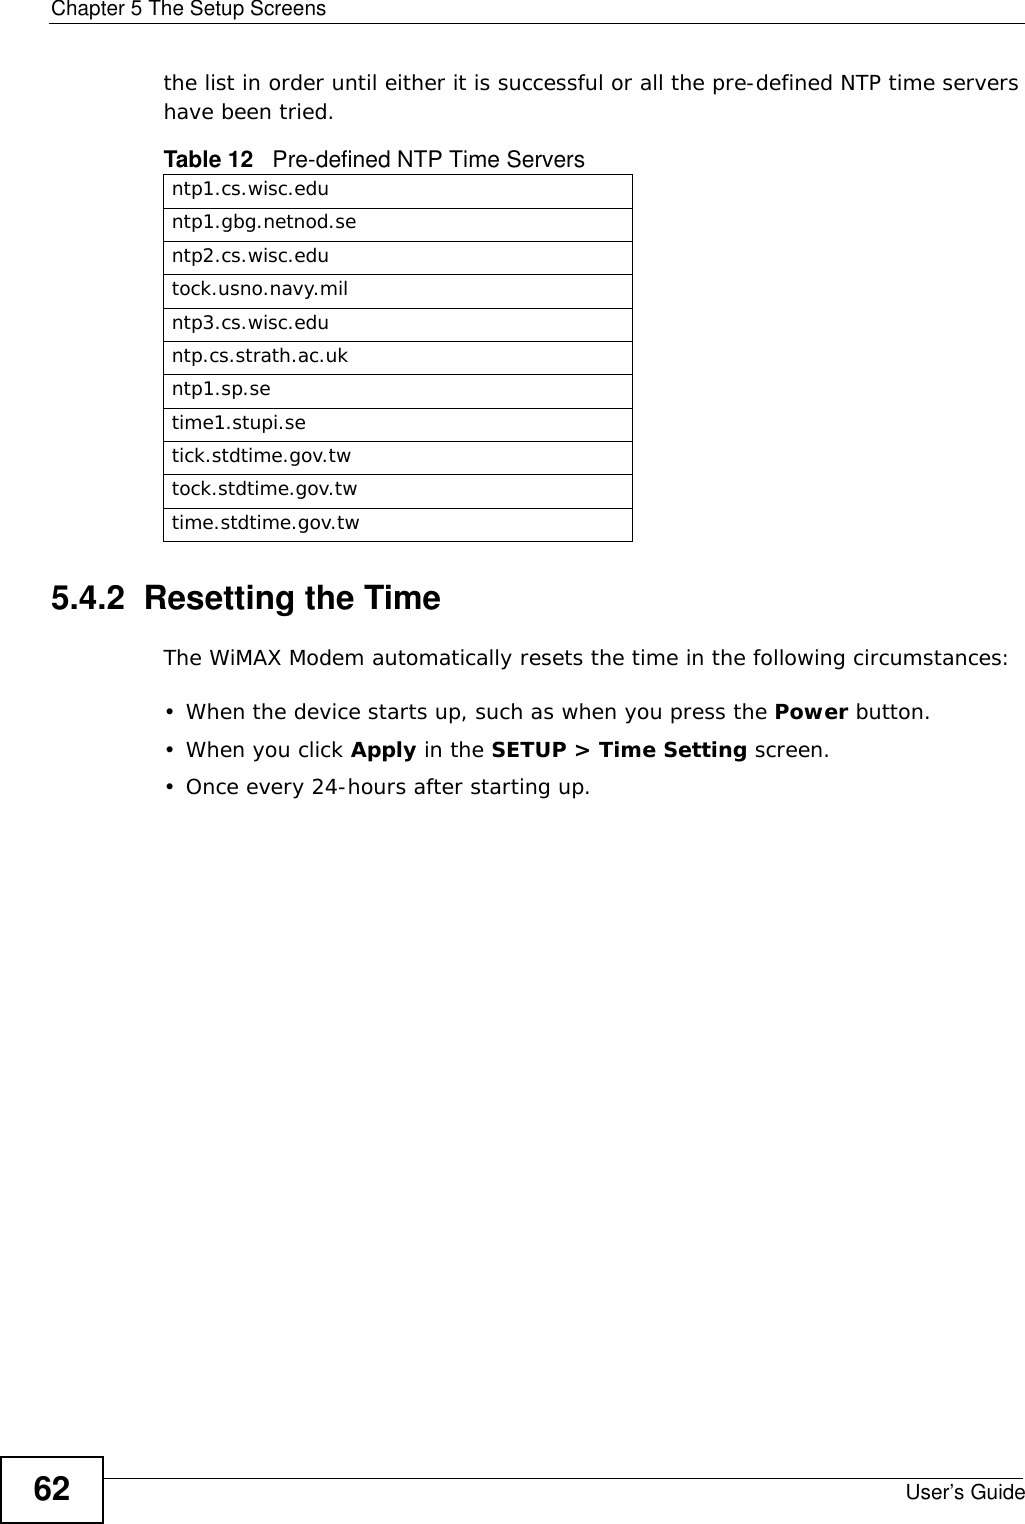 Chapter 5 The Setup ScreensUser’s Guide62the list in order until either it is successful or all the pre-defined NTP time servers have been tried. 5.4.2  Resetting the TimeThe WiMAX Modem automatically resets the time in the following circumstances:• When the device starts up, such as when you press the Power button.• When you click Apply in the SETUP &gt; Time Setting screen.• Once every 24-hours after starting up.Table 12   Pre-defined NTP Time Serversntp1.cs.wisc.eduntp1.gbg.netnod.sentp2.cs.wisc.edutock.usno.navy.milntp3.cs.wisc.eduntp.cs.strath.ac.ukntp1.sp.setime1.stupi.setick.stdtime.gov.twtock.stdtime.gov.twtime.stdtime.gov.tw